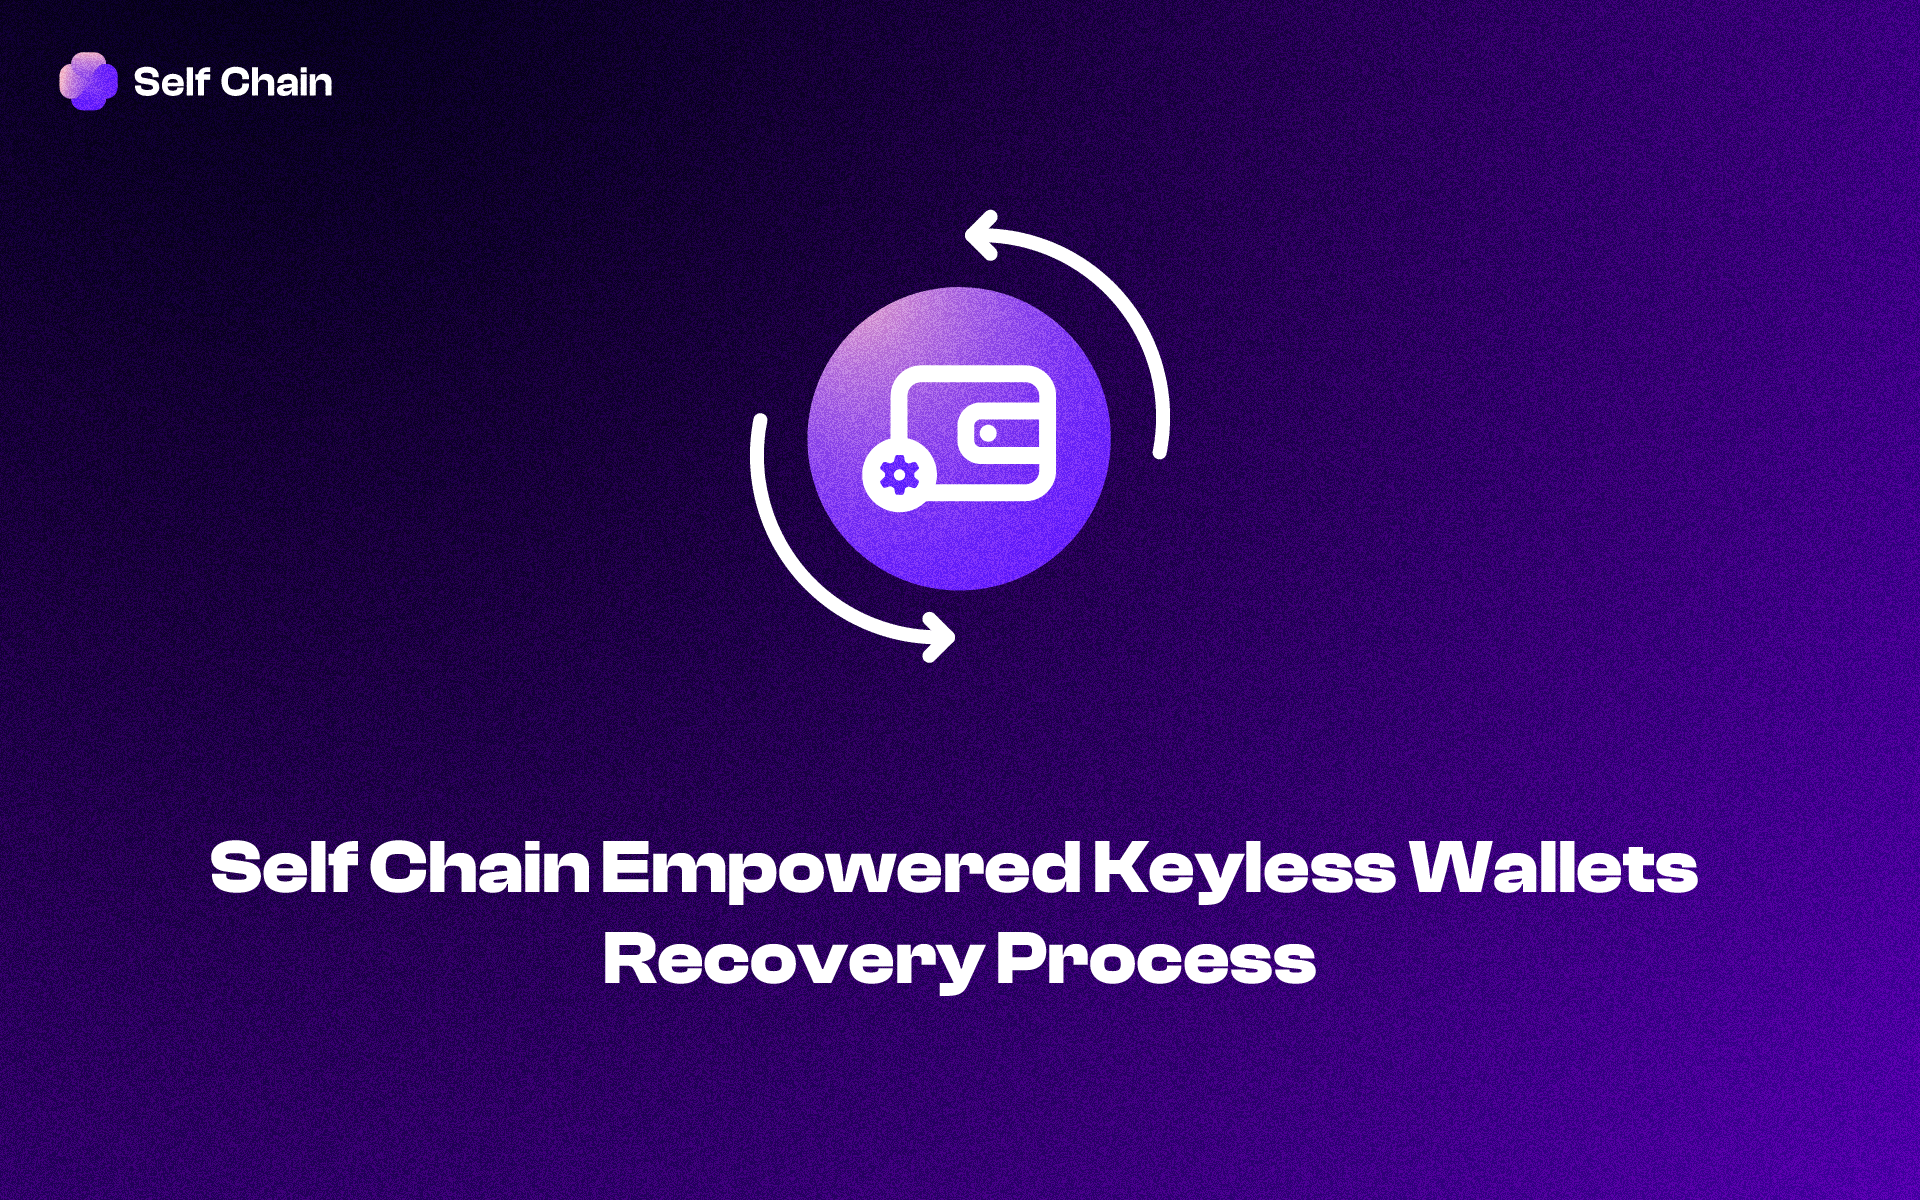 Self Chain Empowered Keyless Wallet Recovery Process